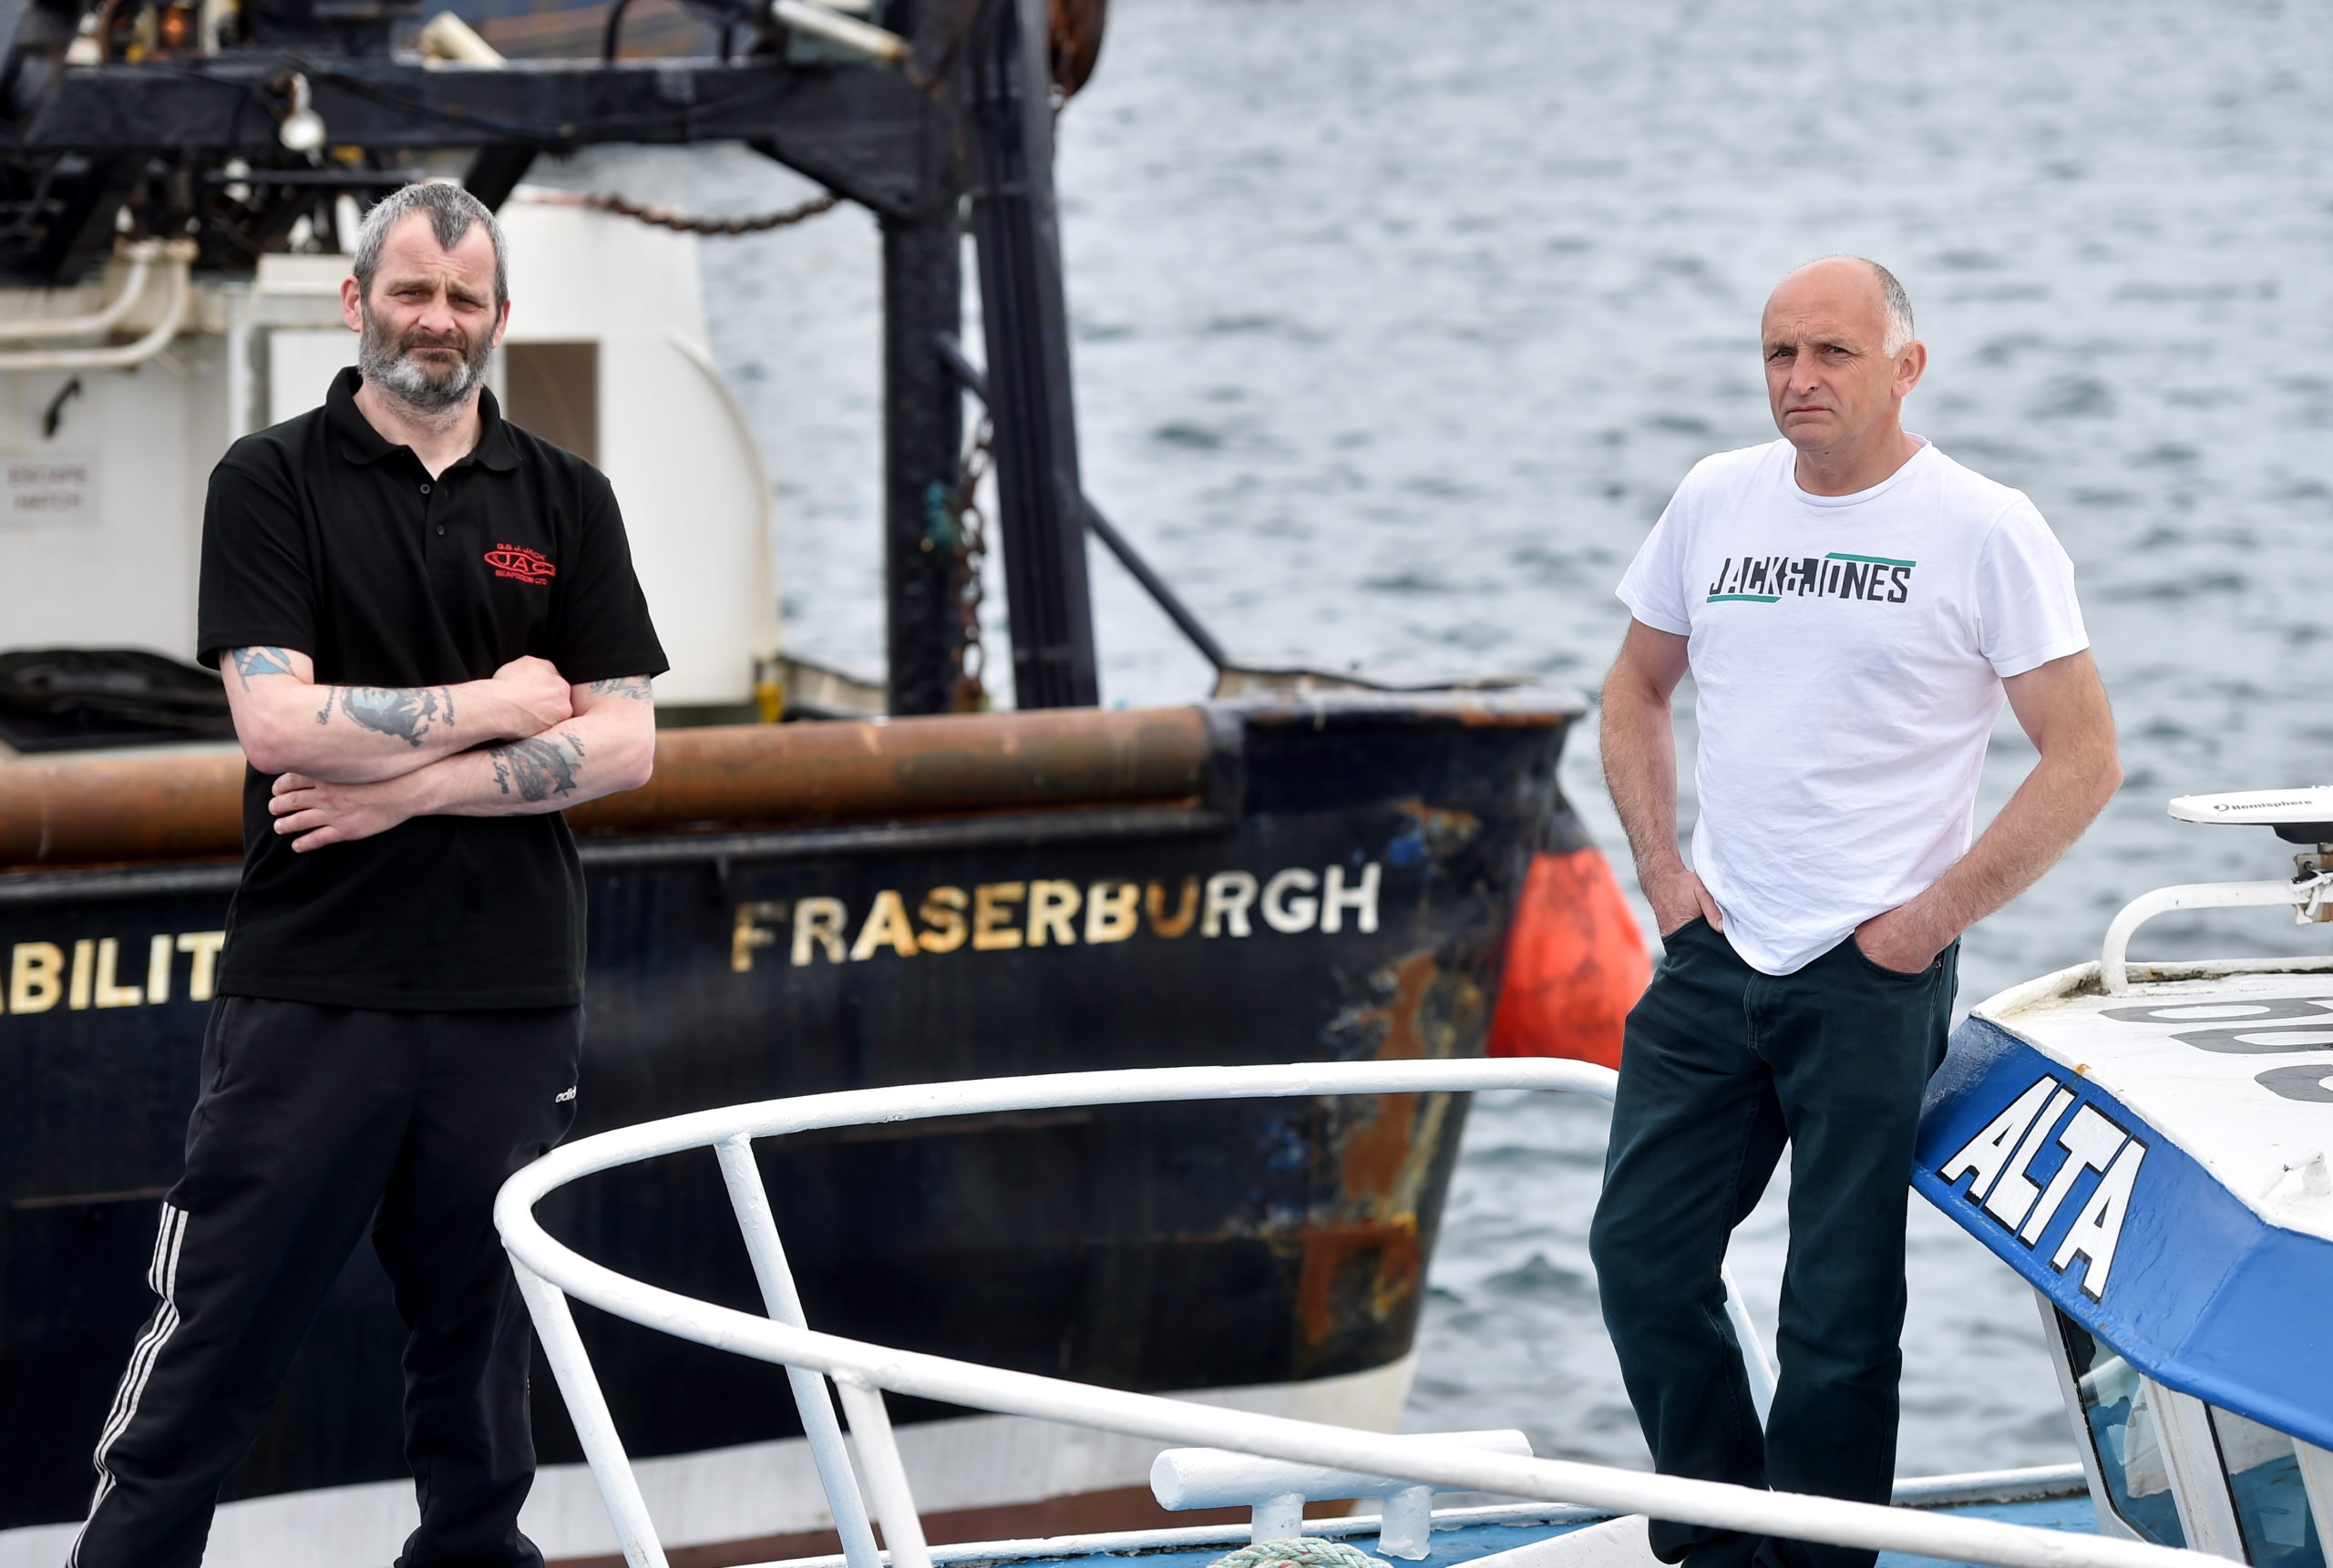 Fisherman Michael Ritchie (left) and Robert Souter (right) at Fraserburgh Harbour. 
Picture by Scott Baxter